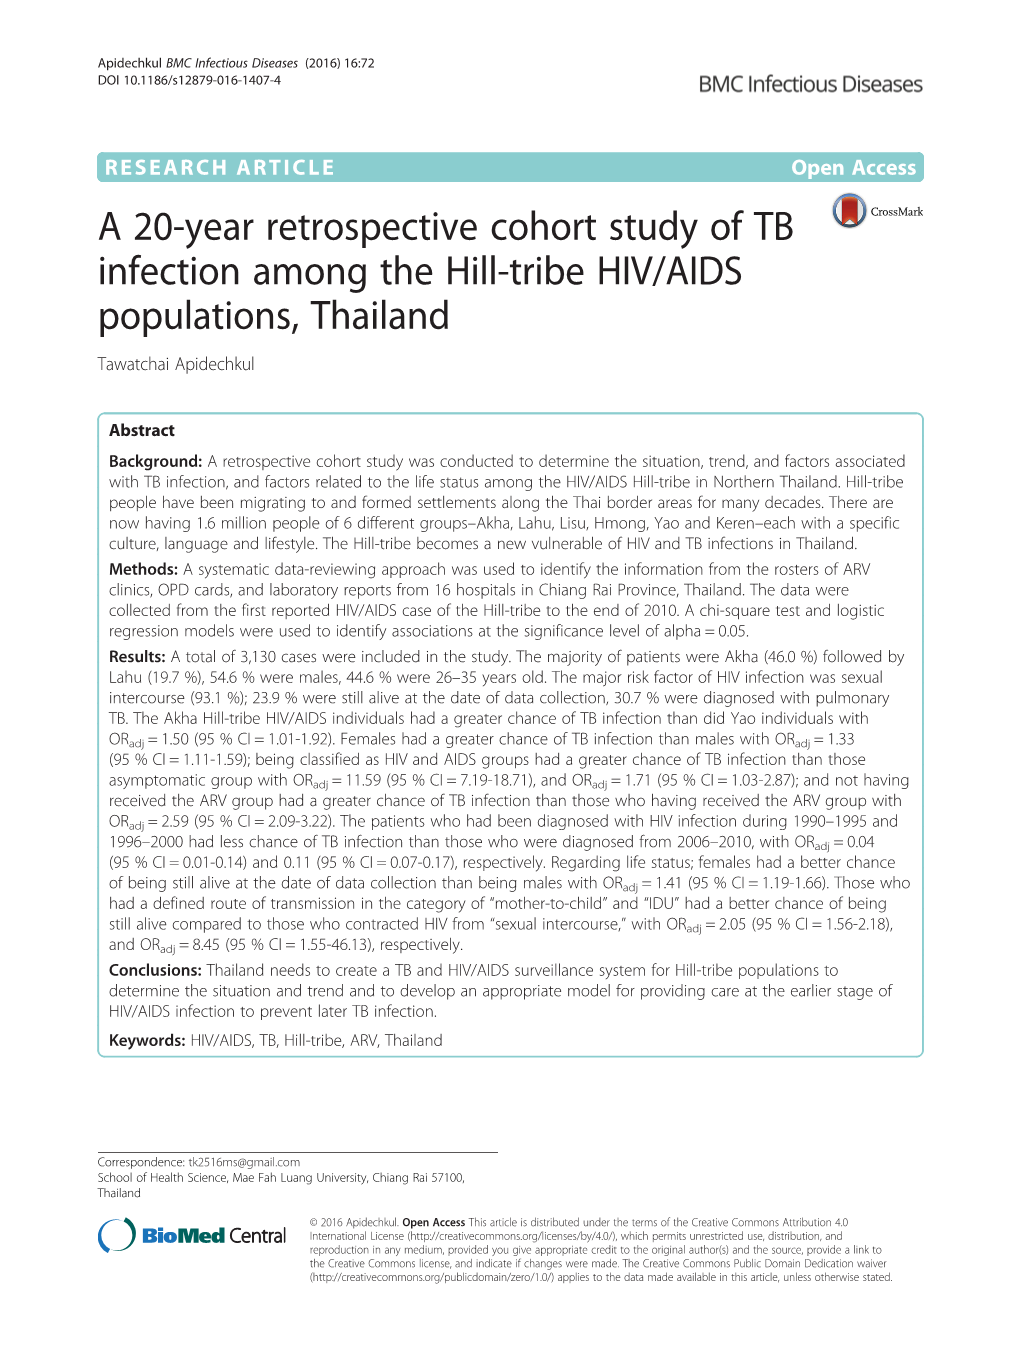 A 20-Year Retrospective Cohort Study of TB Infection Among the Hill-Tribe HIV/AIDS Populations, Thailand Tawatchai Apidechkul